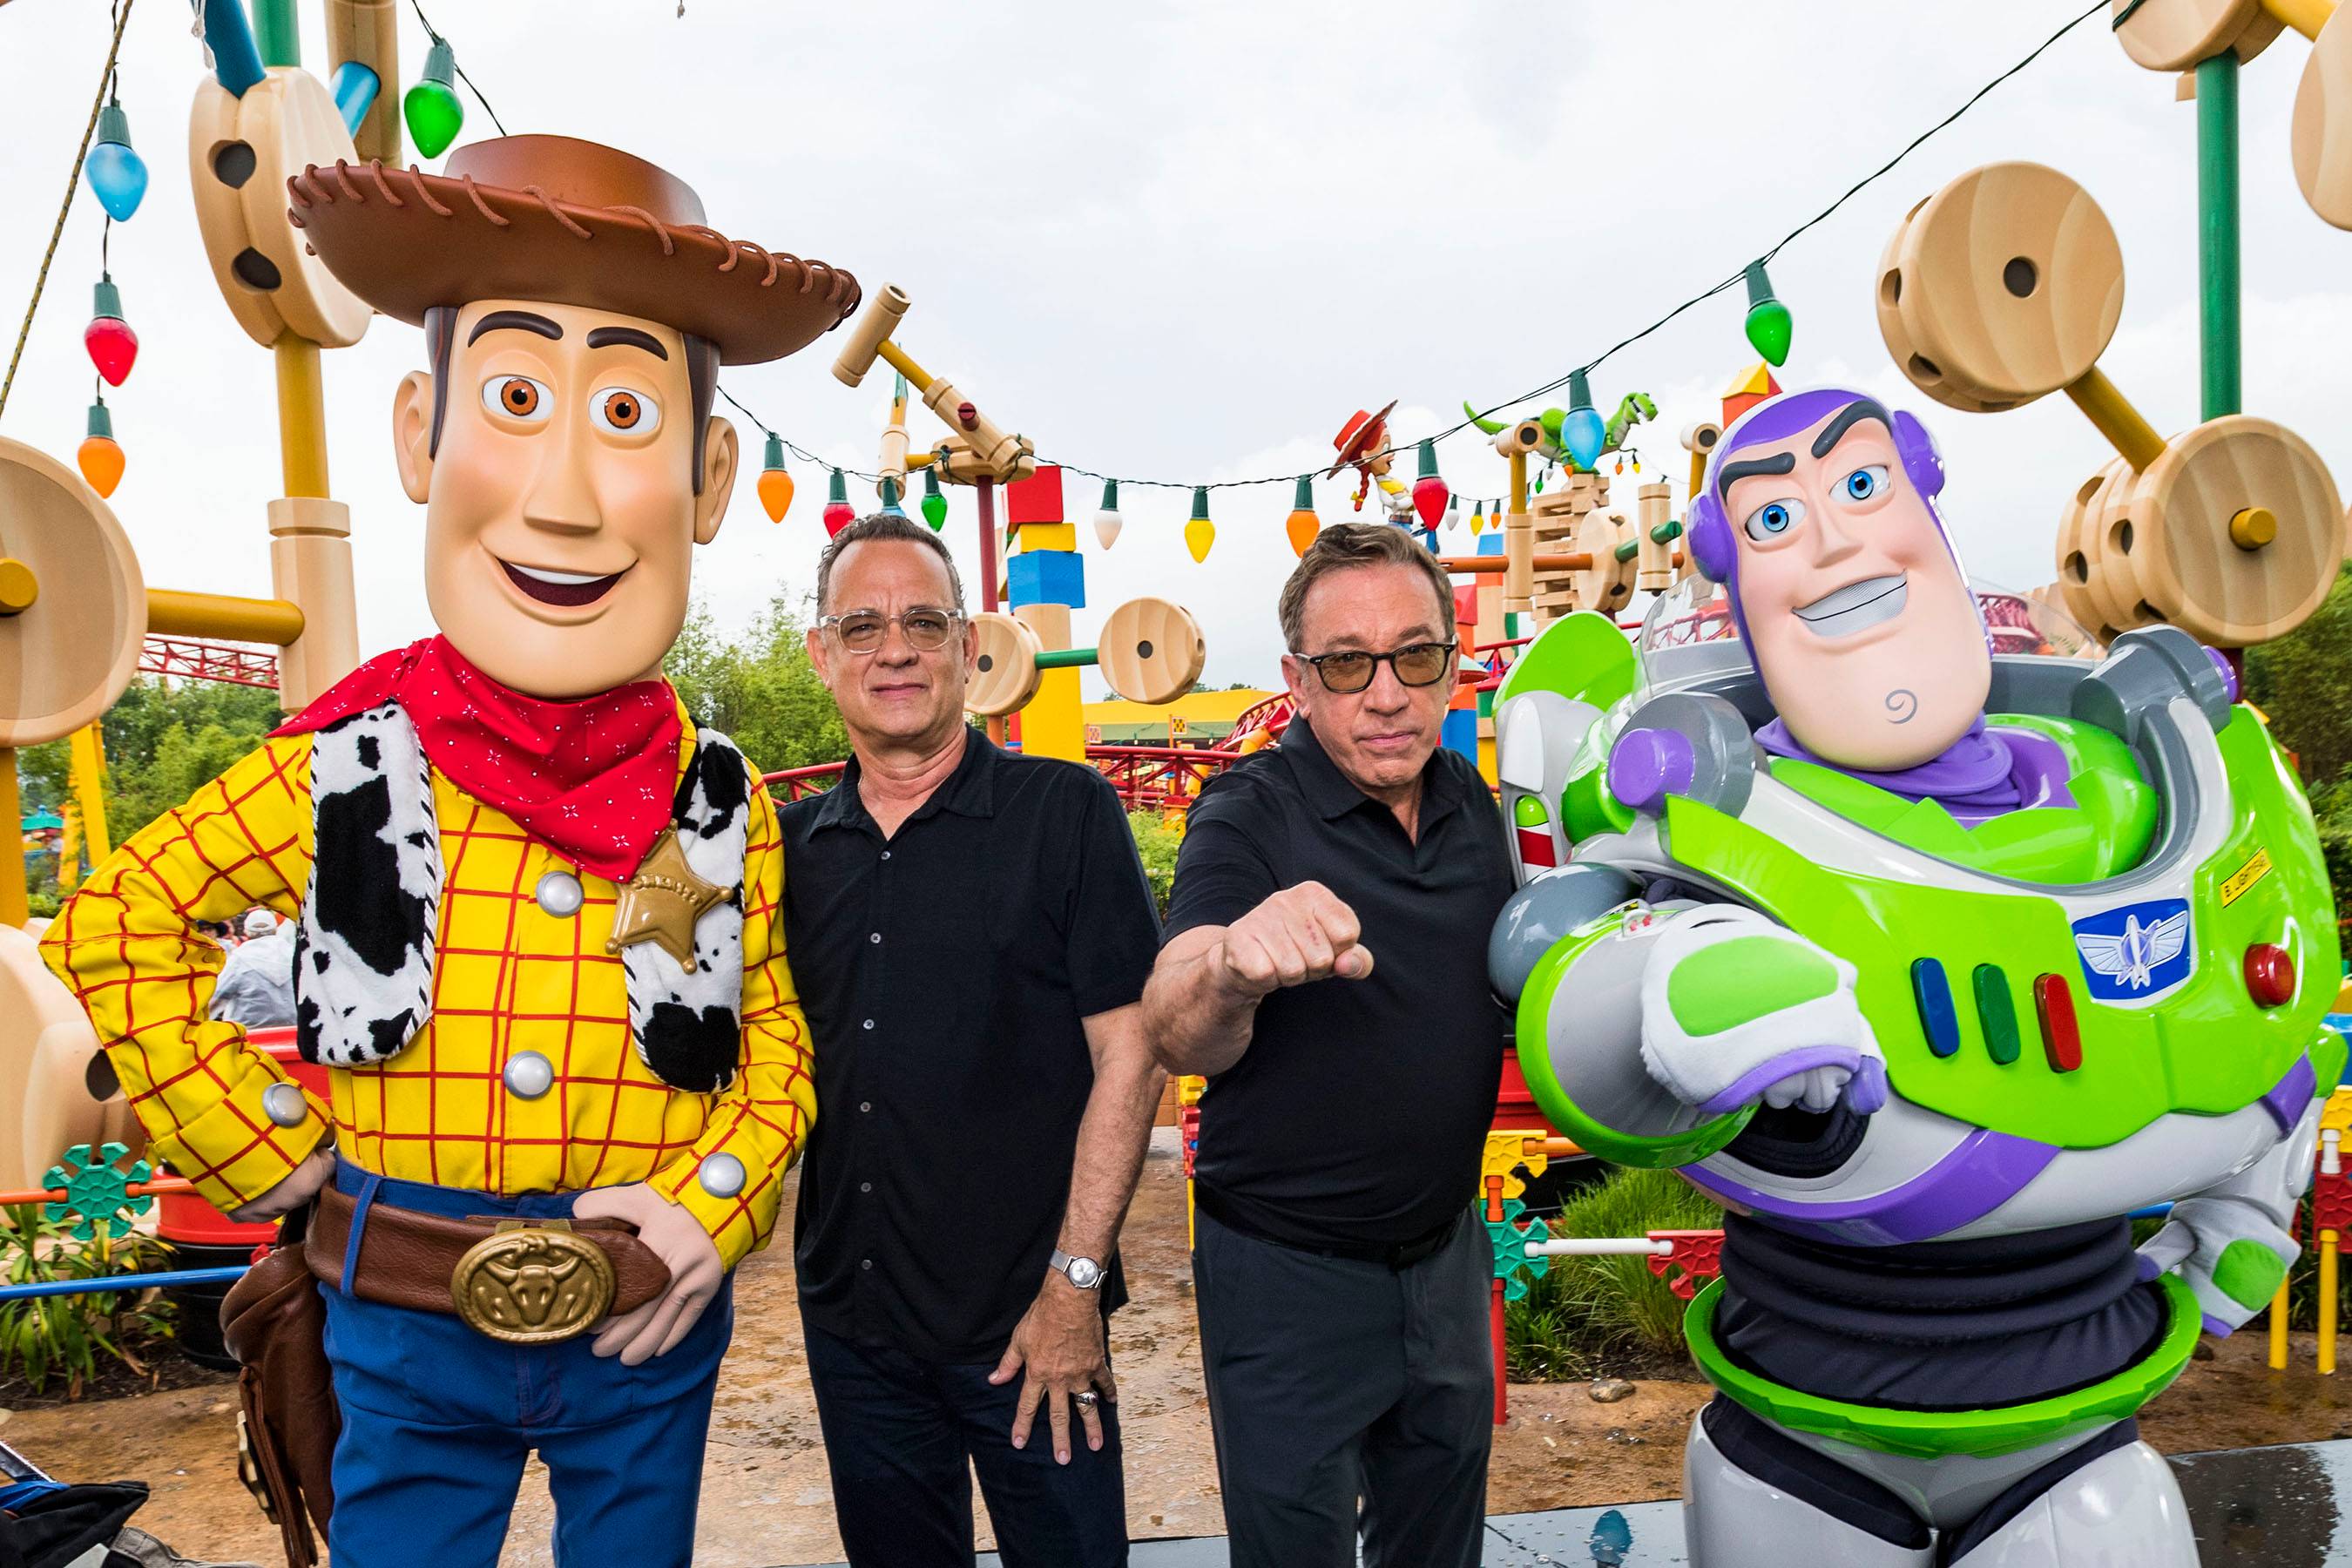 Toy Story 4 Stars Appear in Toy Story Land at Disney's Hollywood Studios